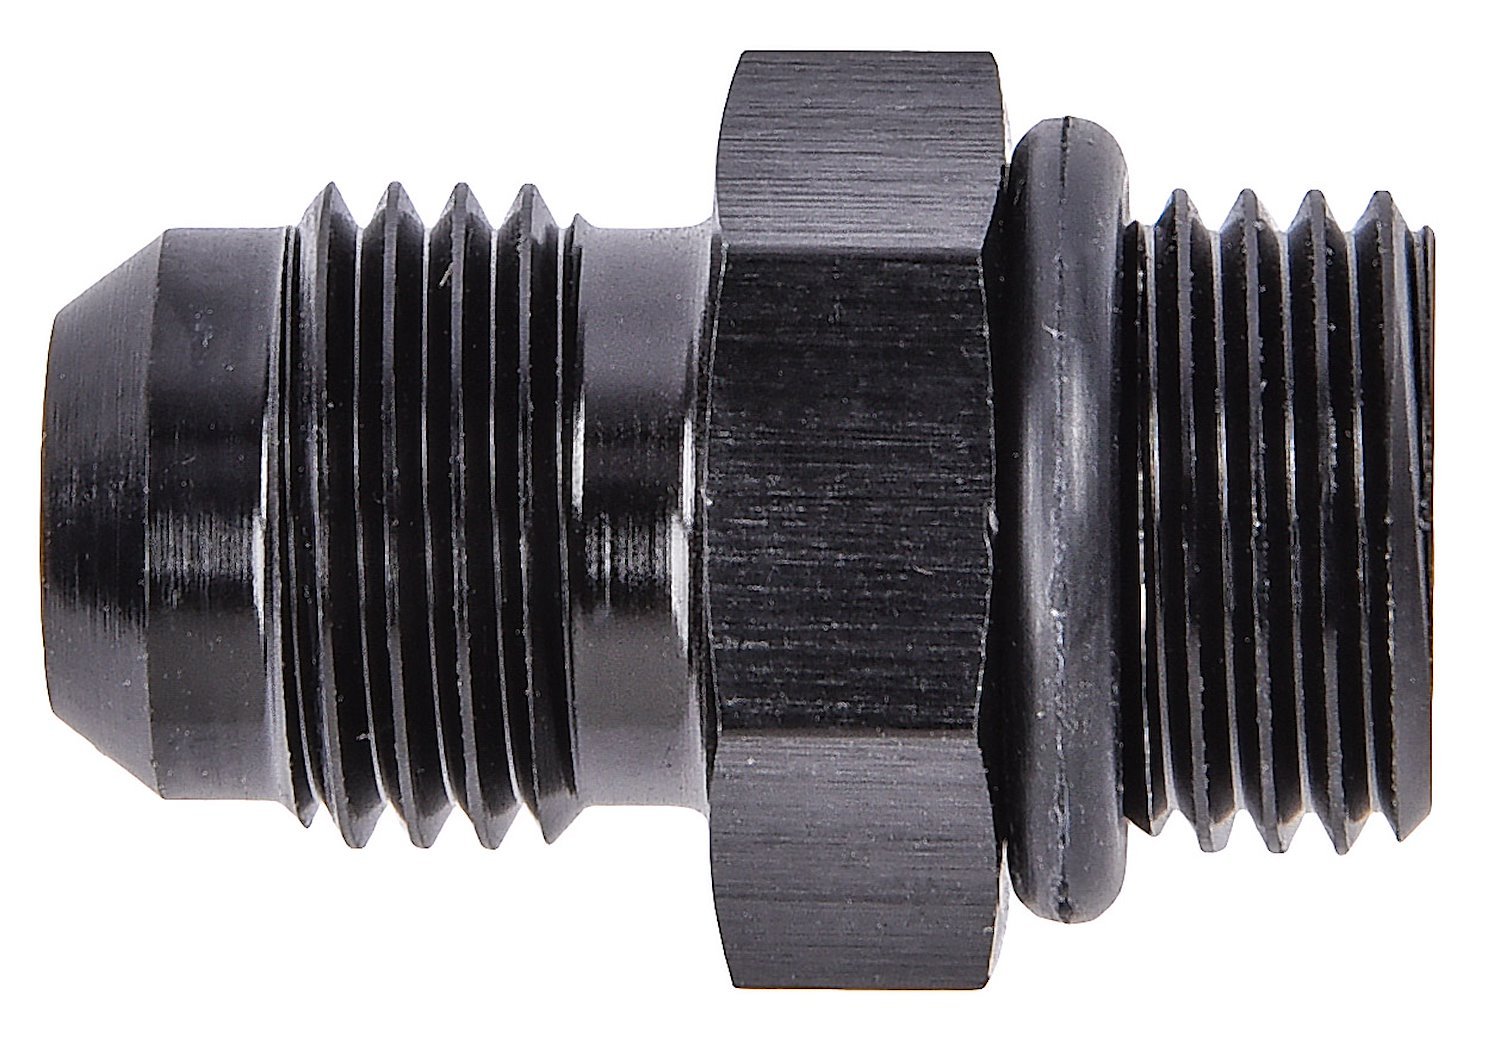 6 AN to -6 AN Hose Fitting | Shop for an Aluminum -6 AN to -6 AN Fitting (9/ 16 in.-18 Thread) with Black Anodized Finish Online - JEGS